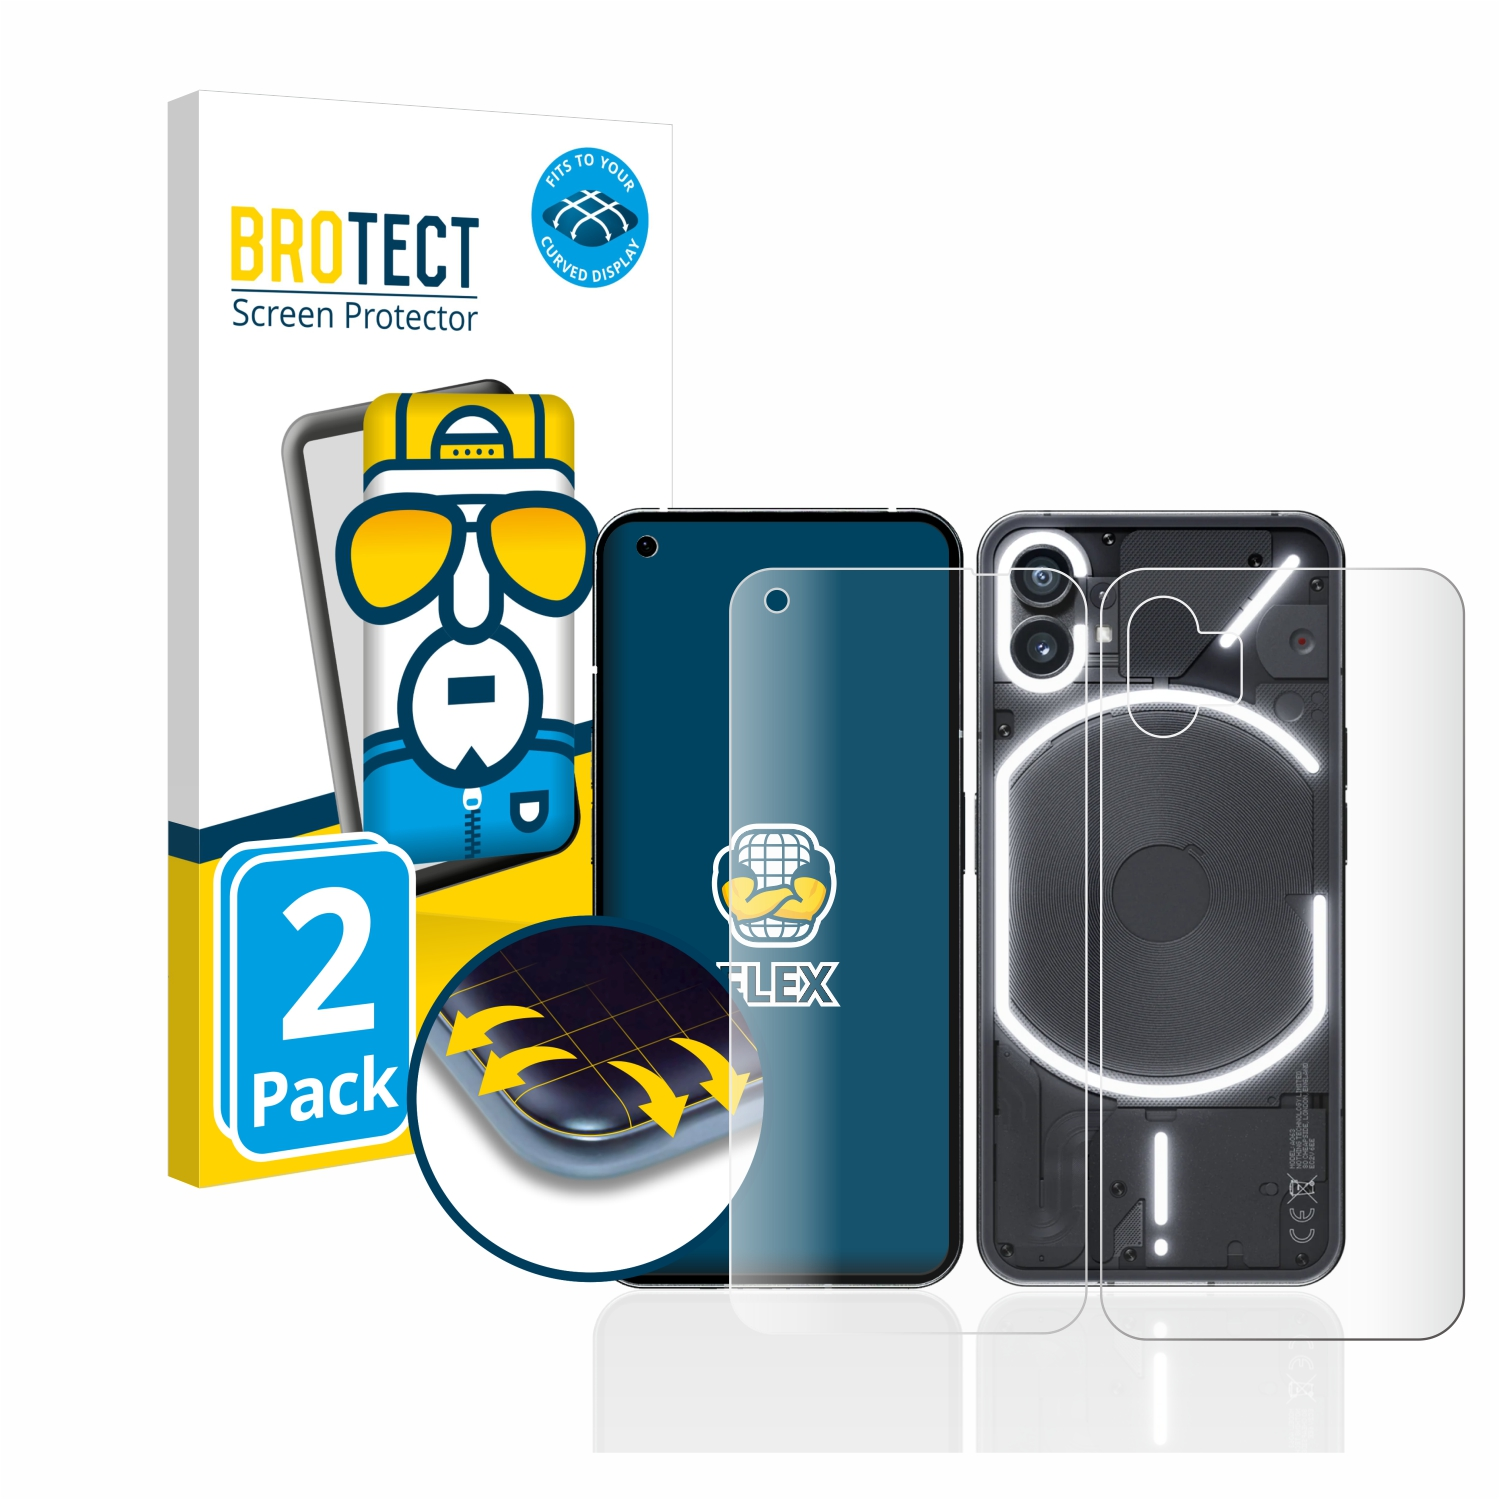 Nothing 2x BROTECT Full-Cover 3D (1)) Schutzfolie(für Curved Phone Flex